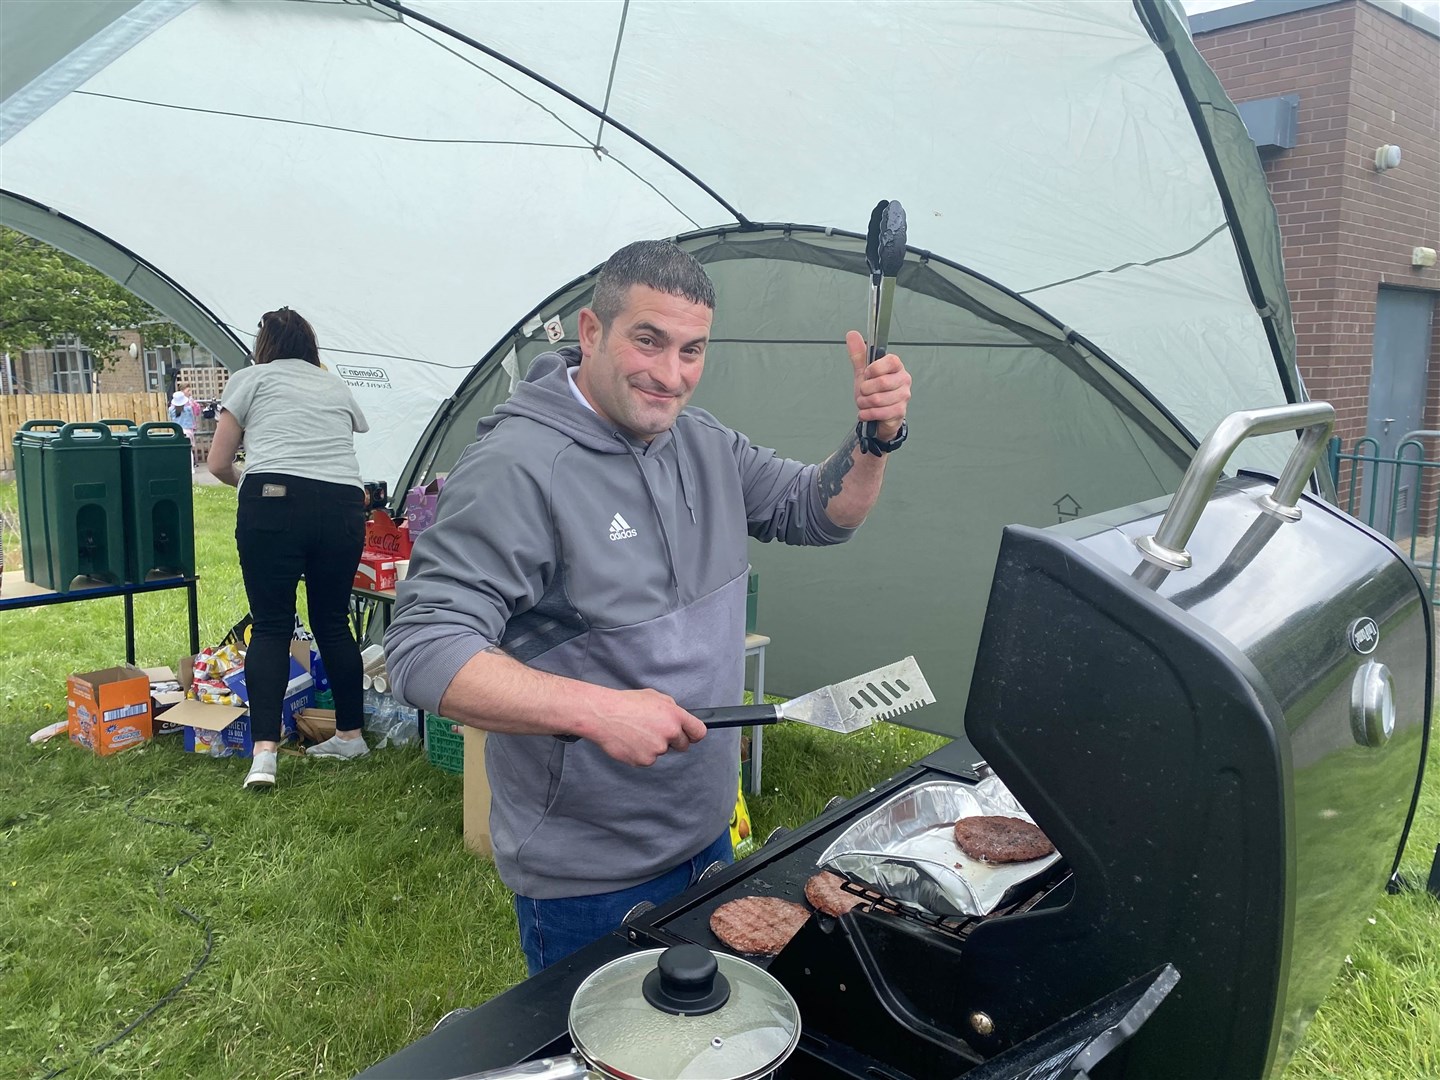 Service with a smile from Michael Ogilvie at the barbecue.